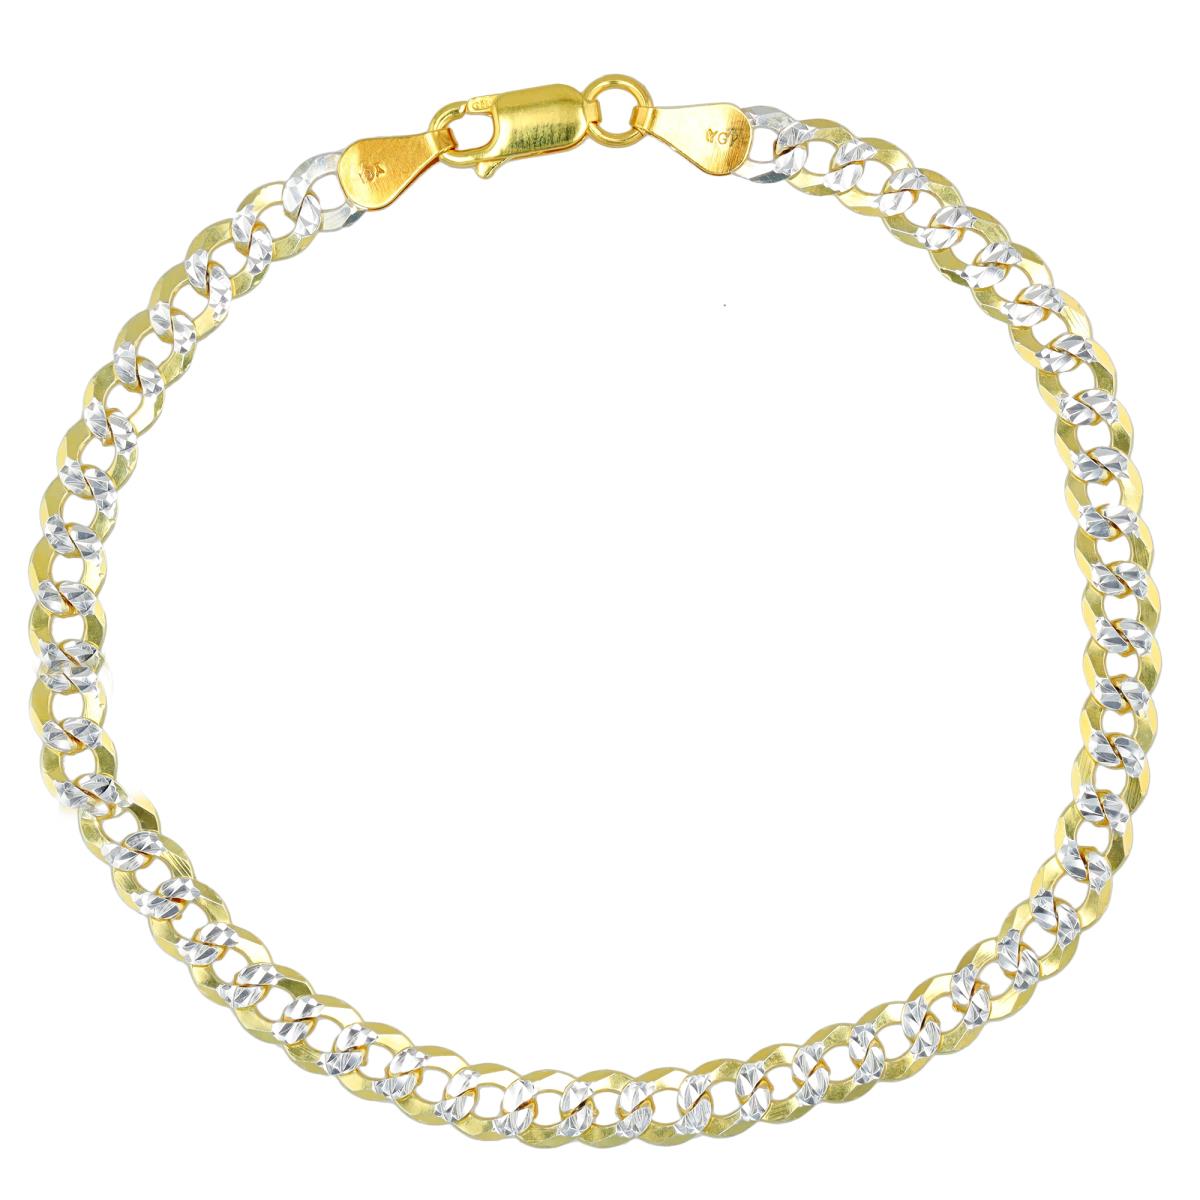 Sterling Silver Two-Tone DC 5mm 150 Curb Pave 8.25"Chain Bracelet